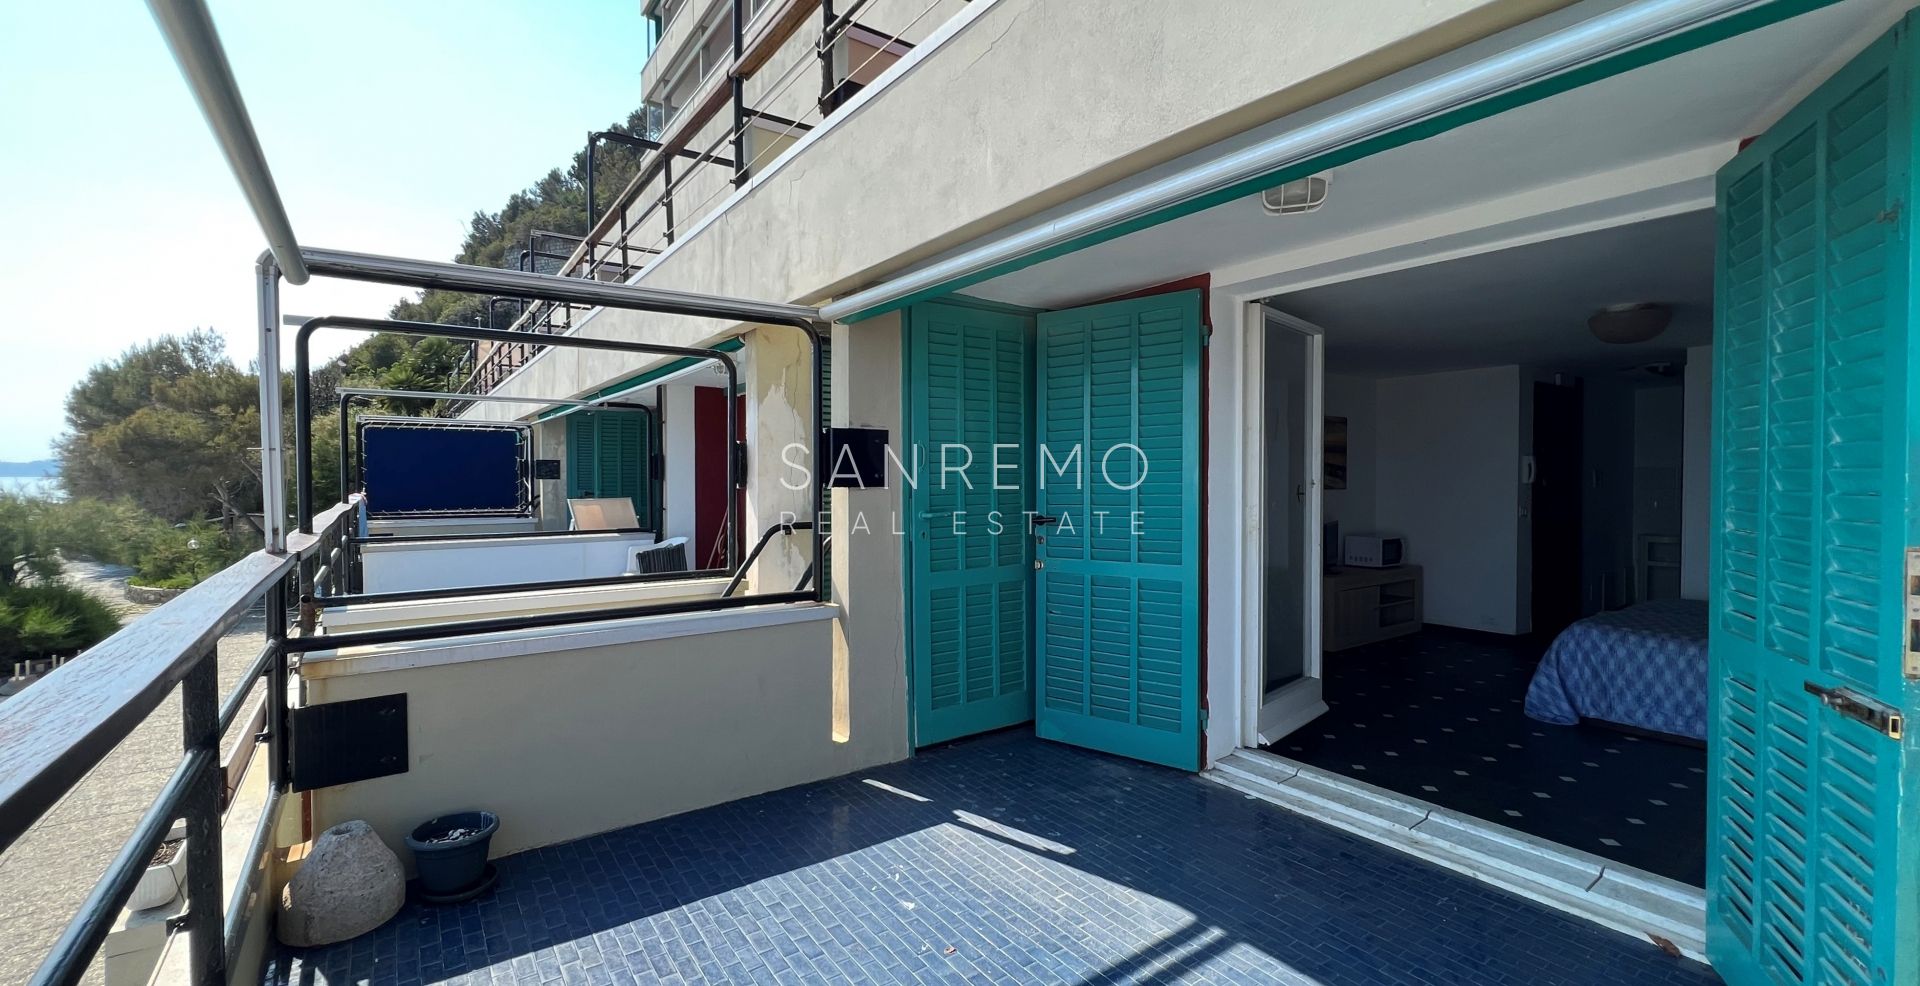 Studio Flat in Capo Nero with 3 swimming pools and bar service